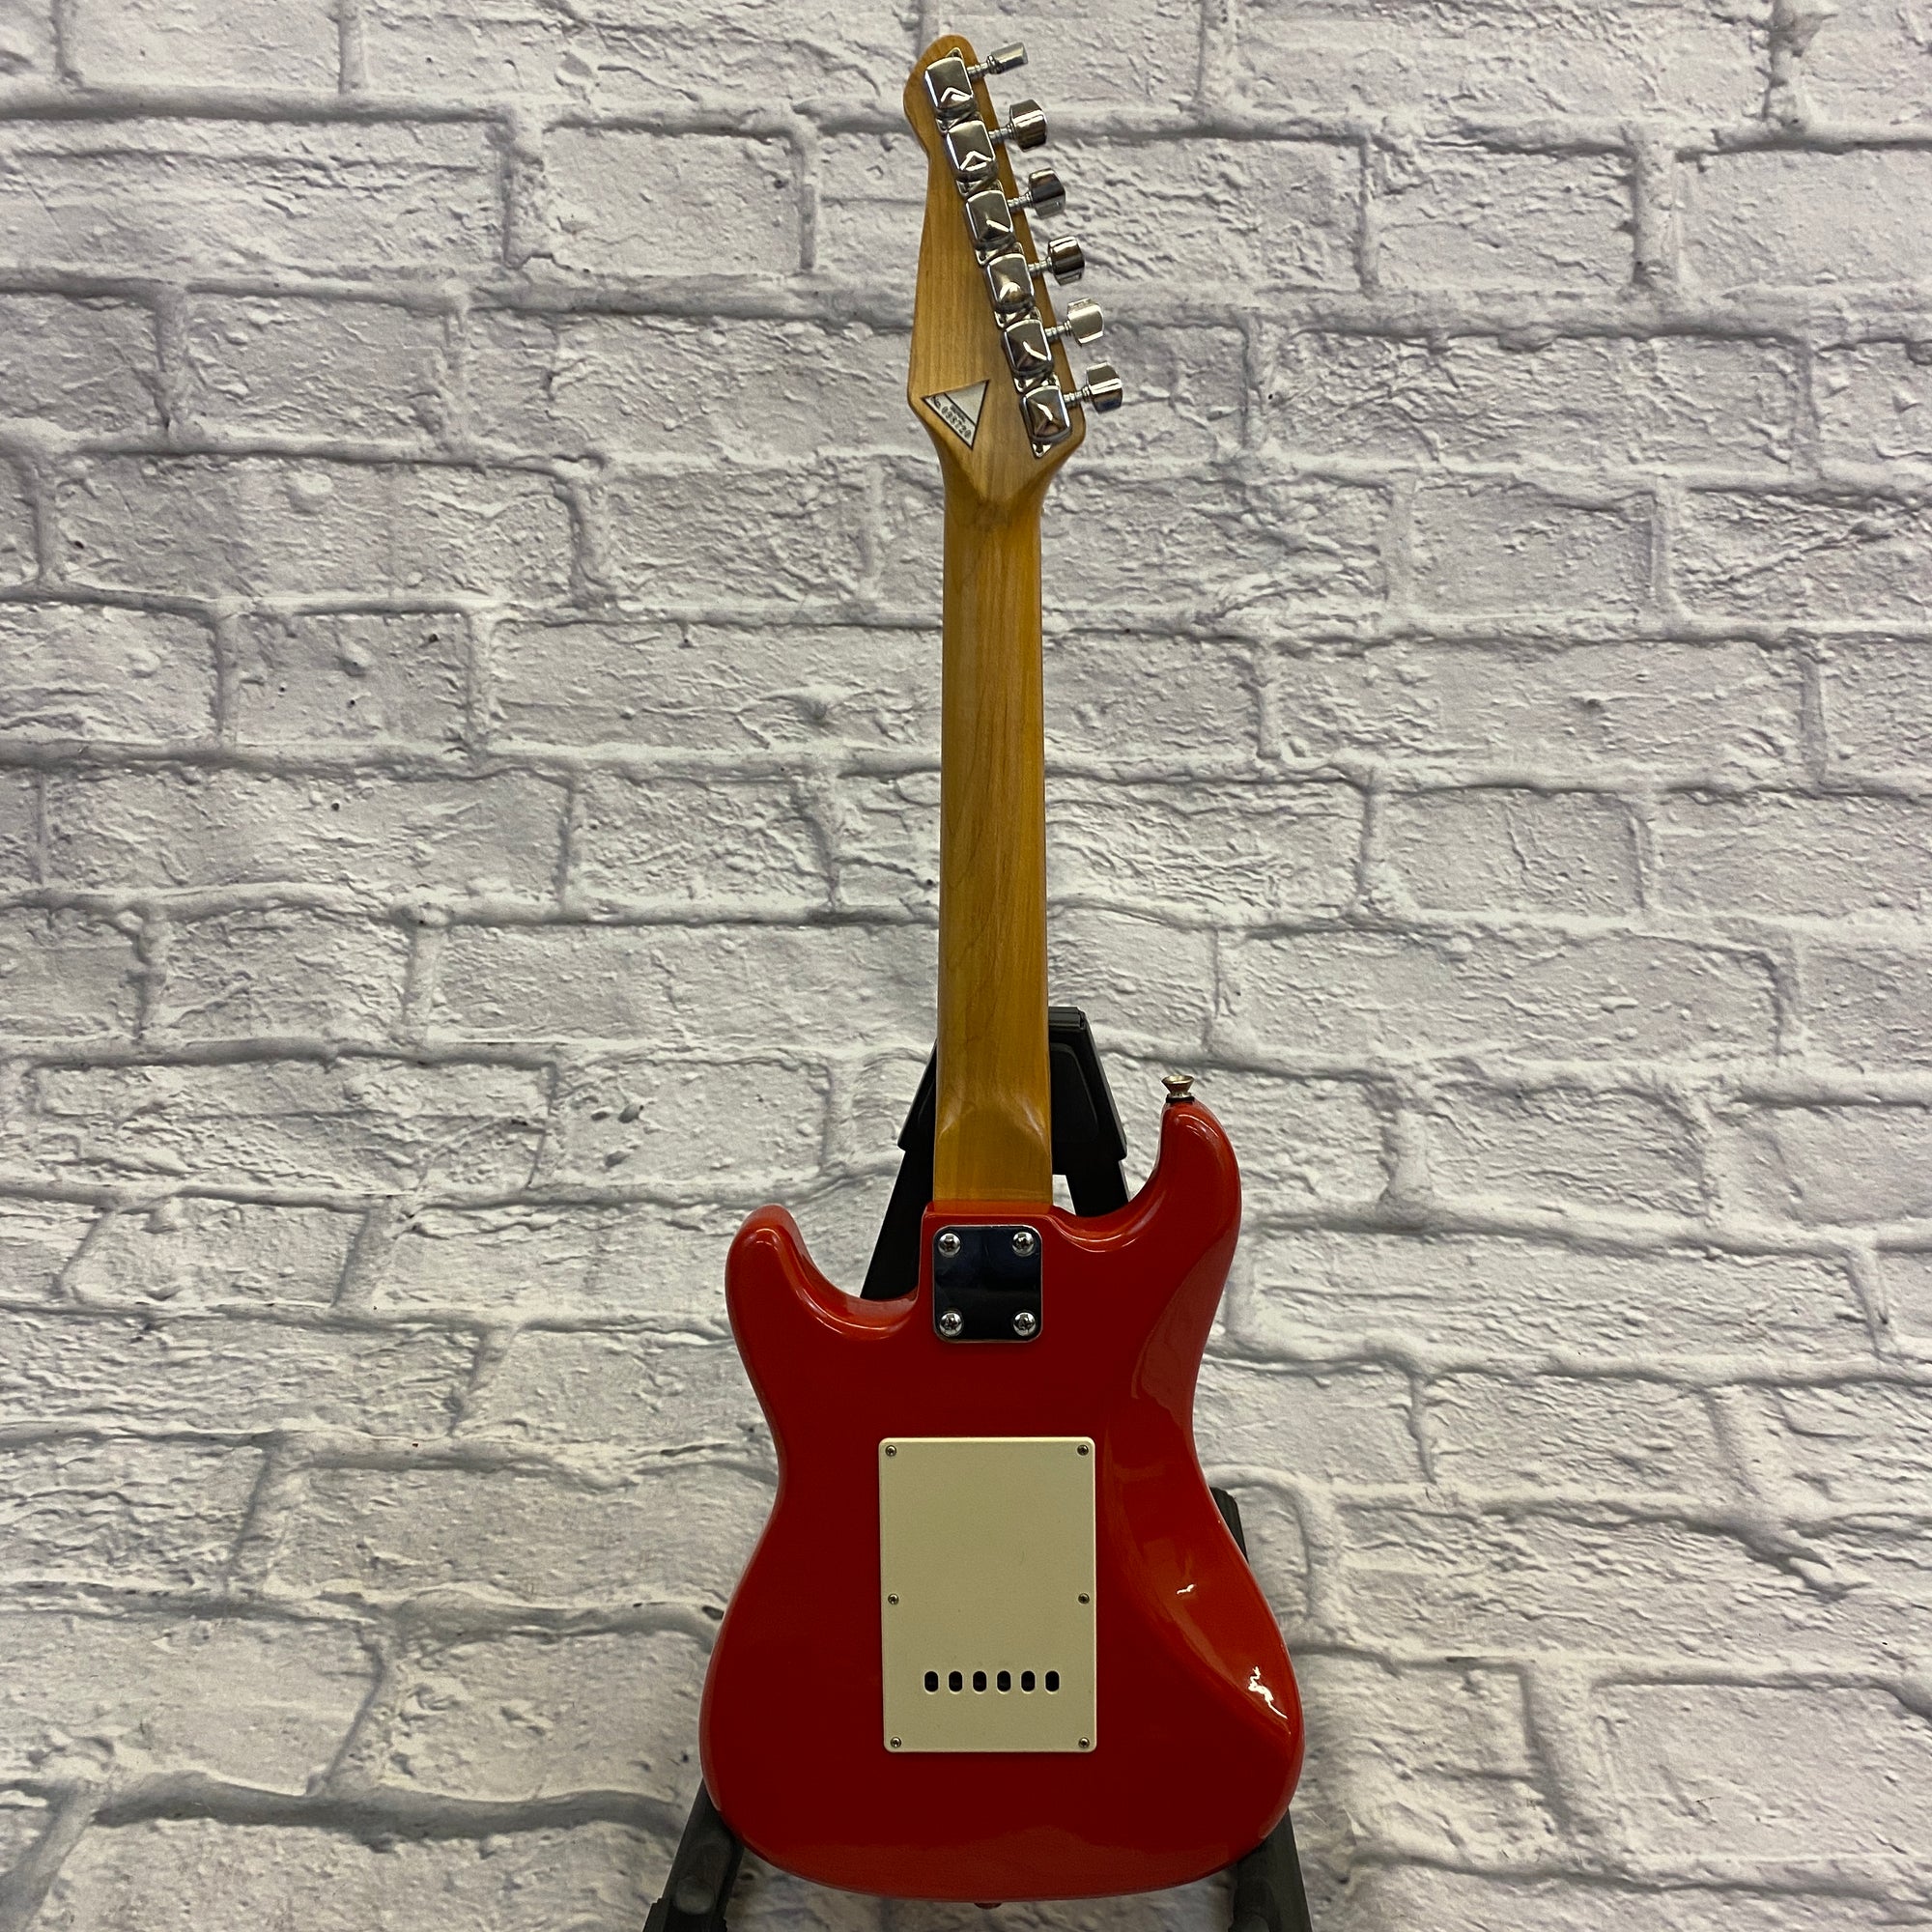 Slat Defective Stock Bling Red Electric Guitar Body Finished with